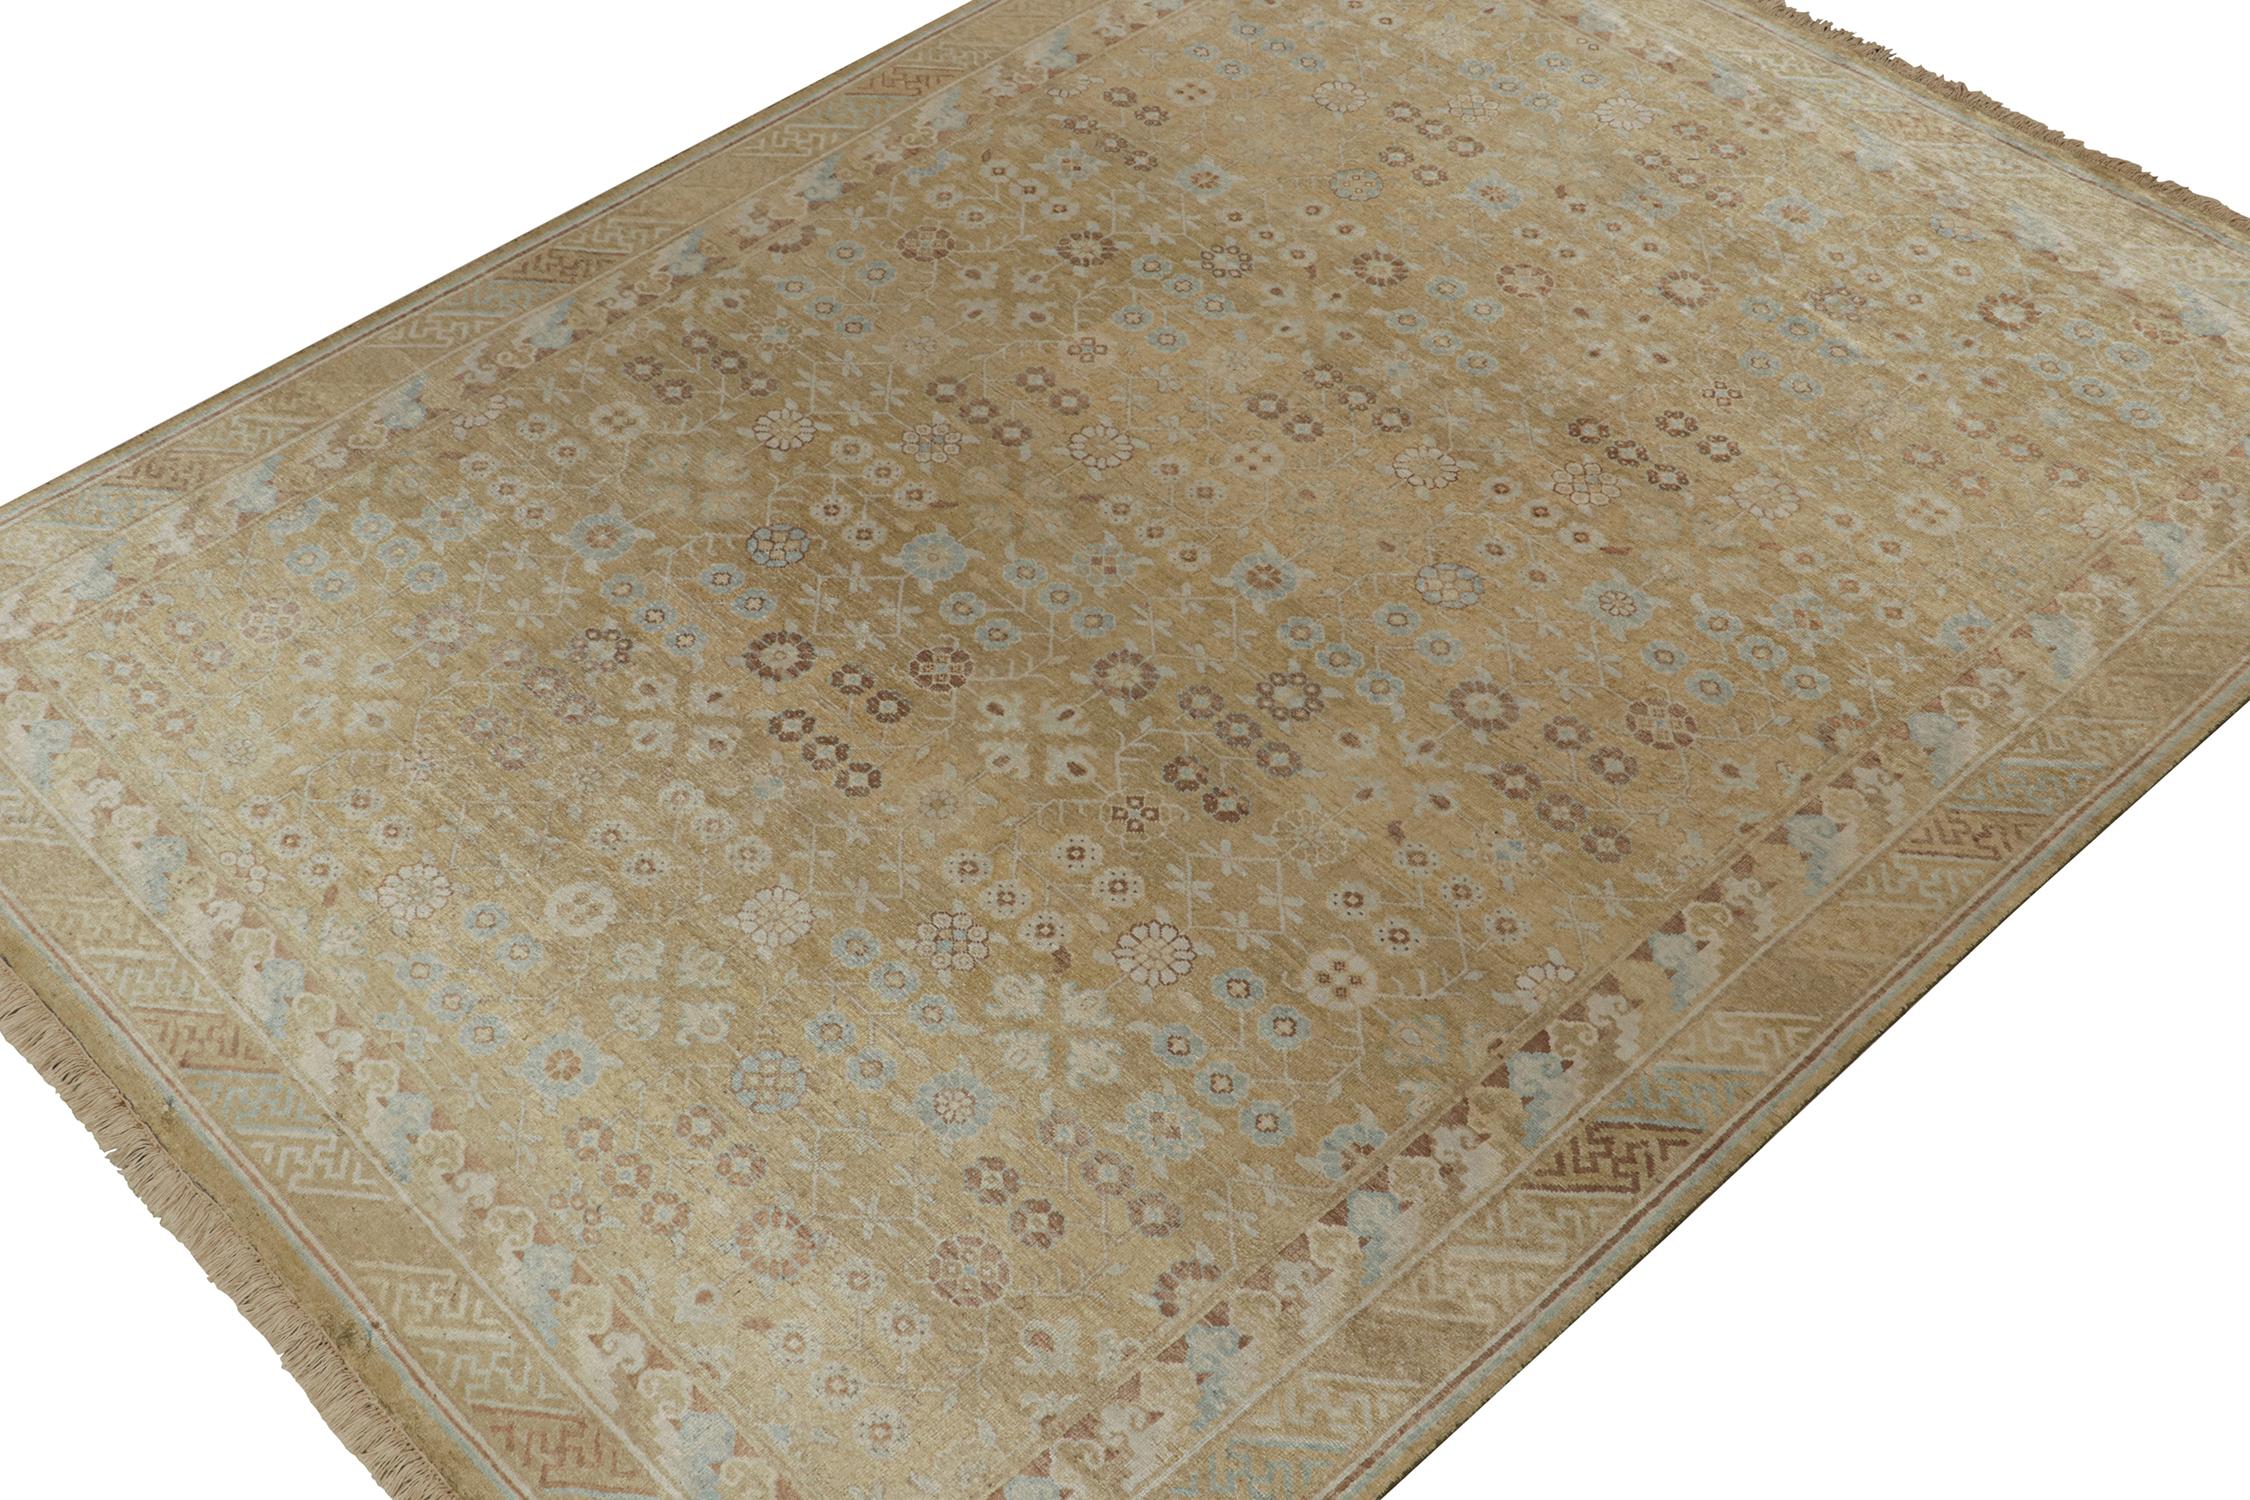 An 8x10 rug inspired from antique Khotan rug styles, from Rug & Kilim’s Modern Classics Collection. Hand knotted in silk, playing an exceptional blue & beige-brown in geometric patterns with classic grace.
Further On the Design:
The play of cool